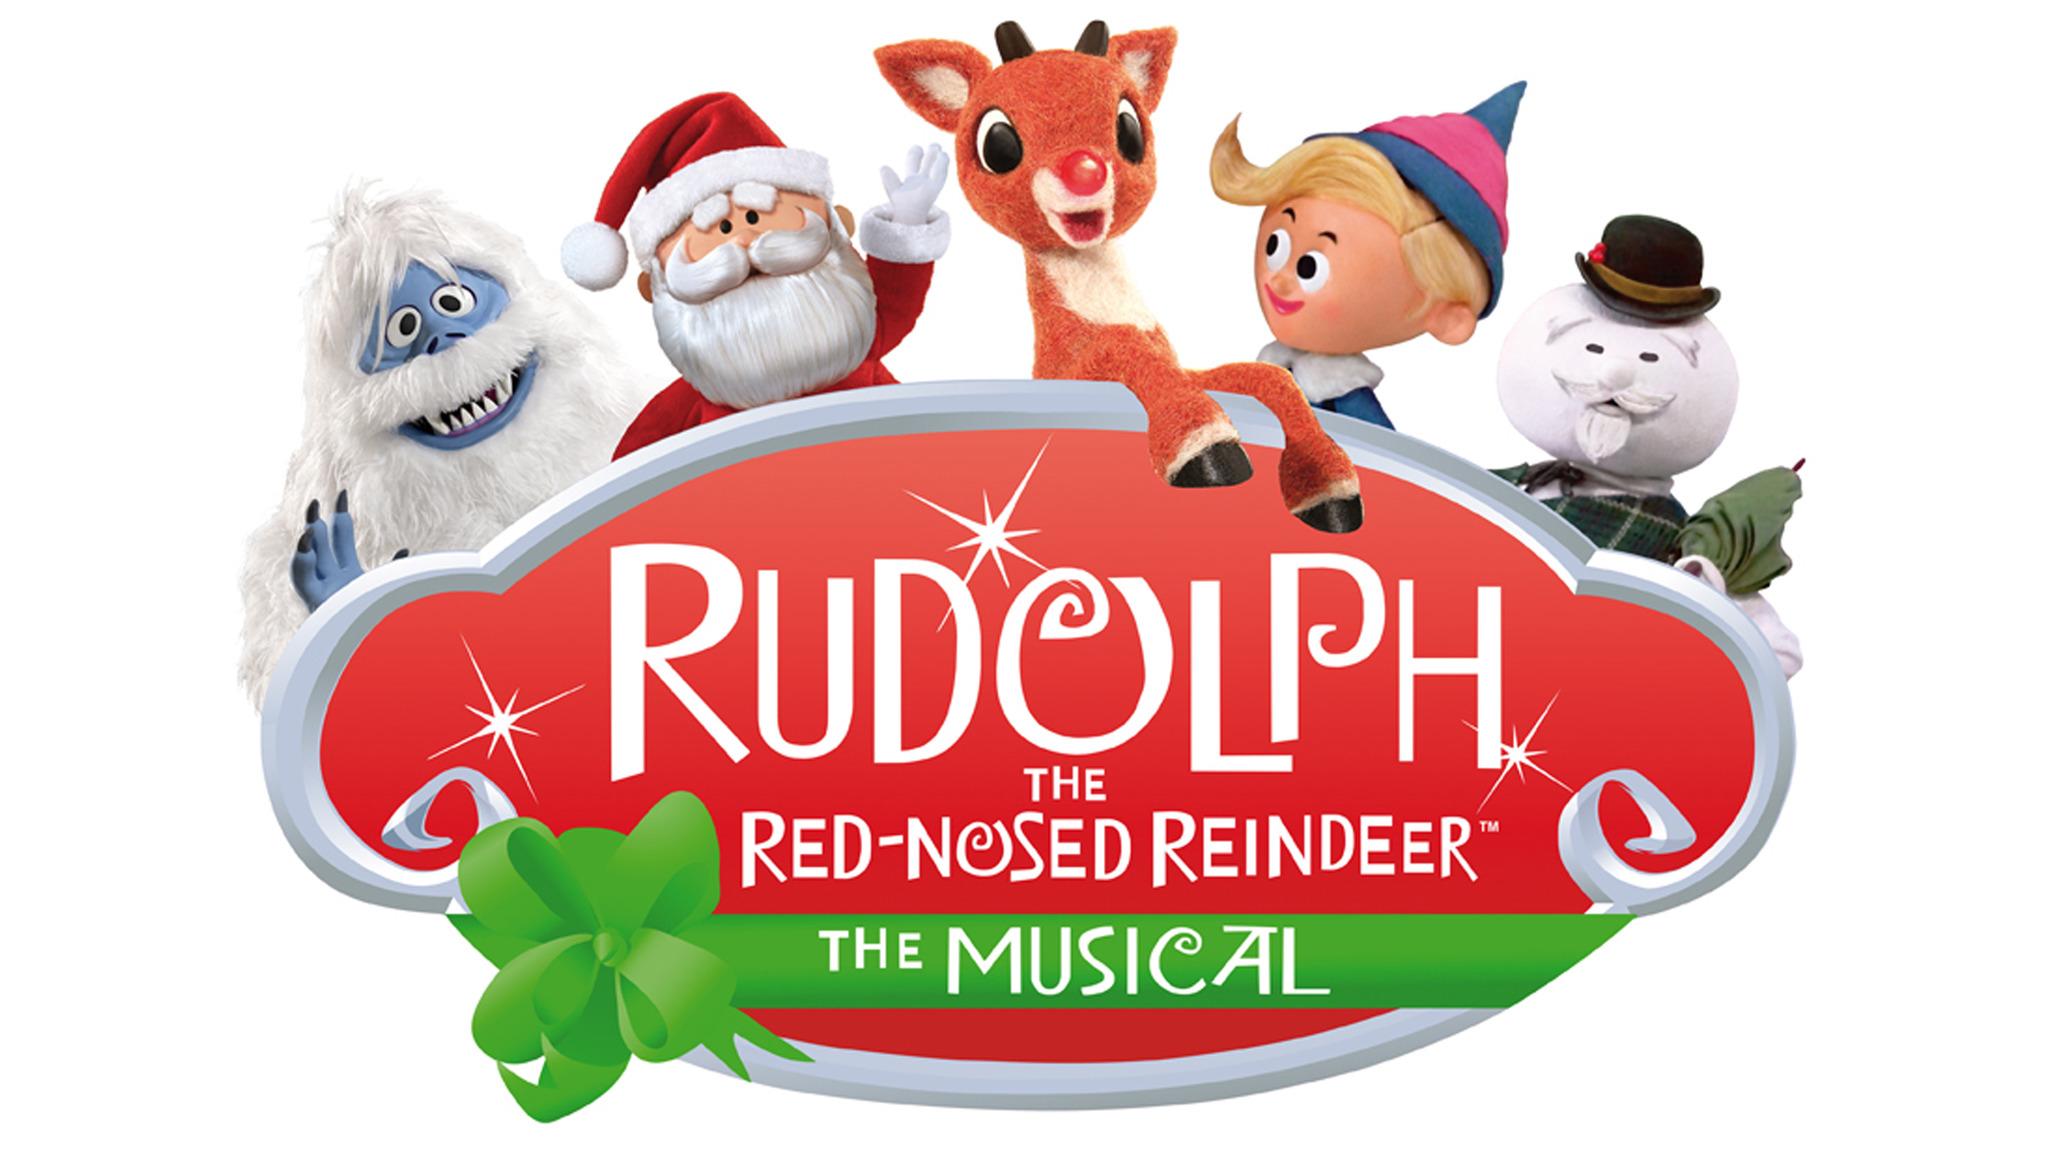 Rudolph The Red-Nosed Reindeer in Charlotte event information